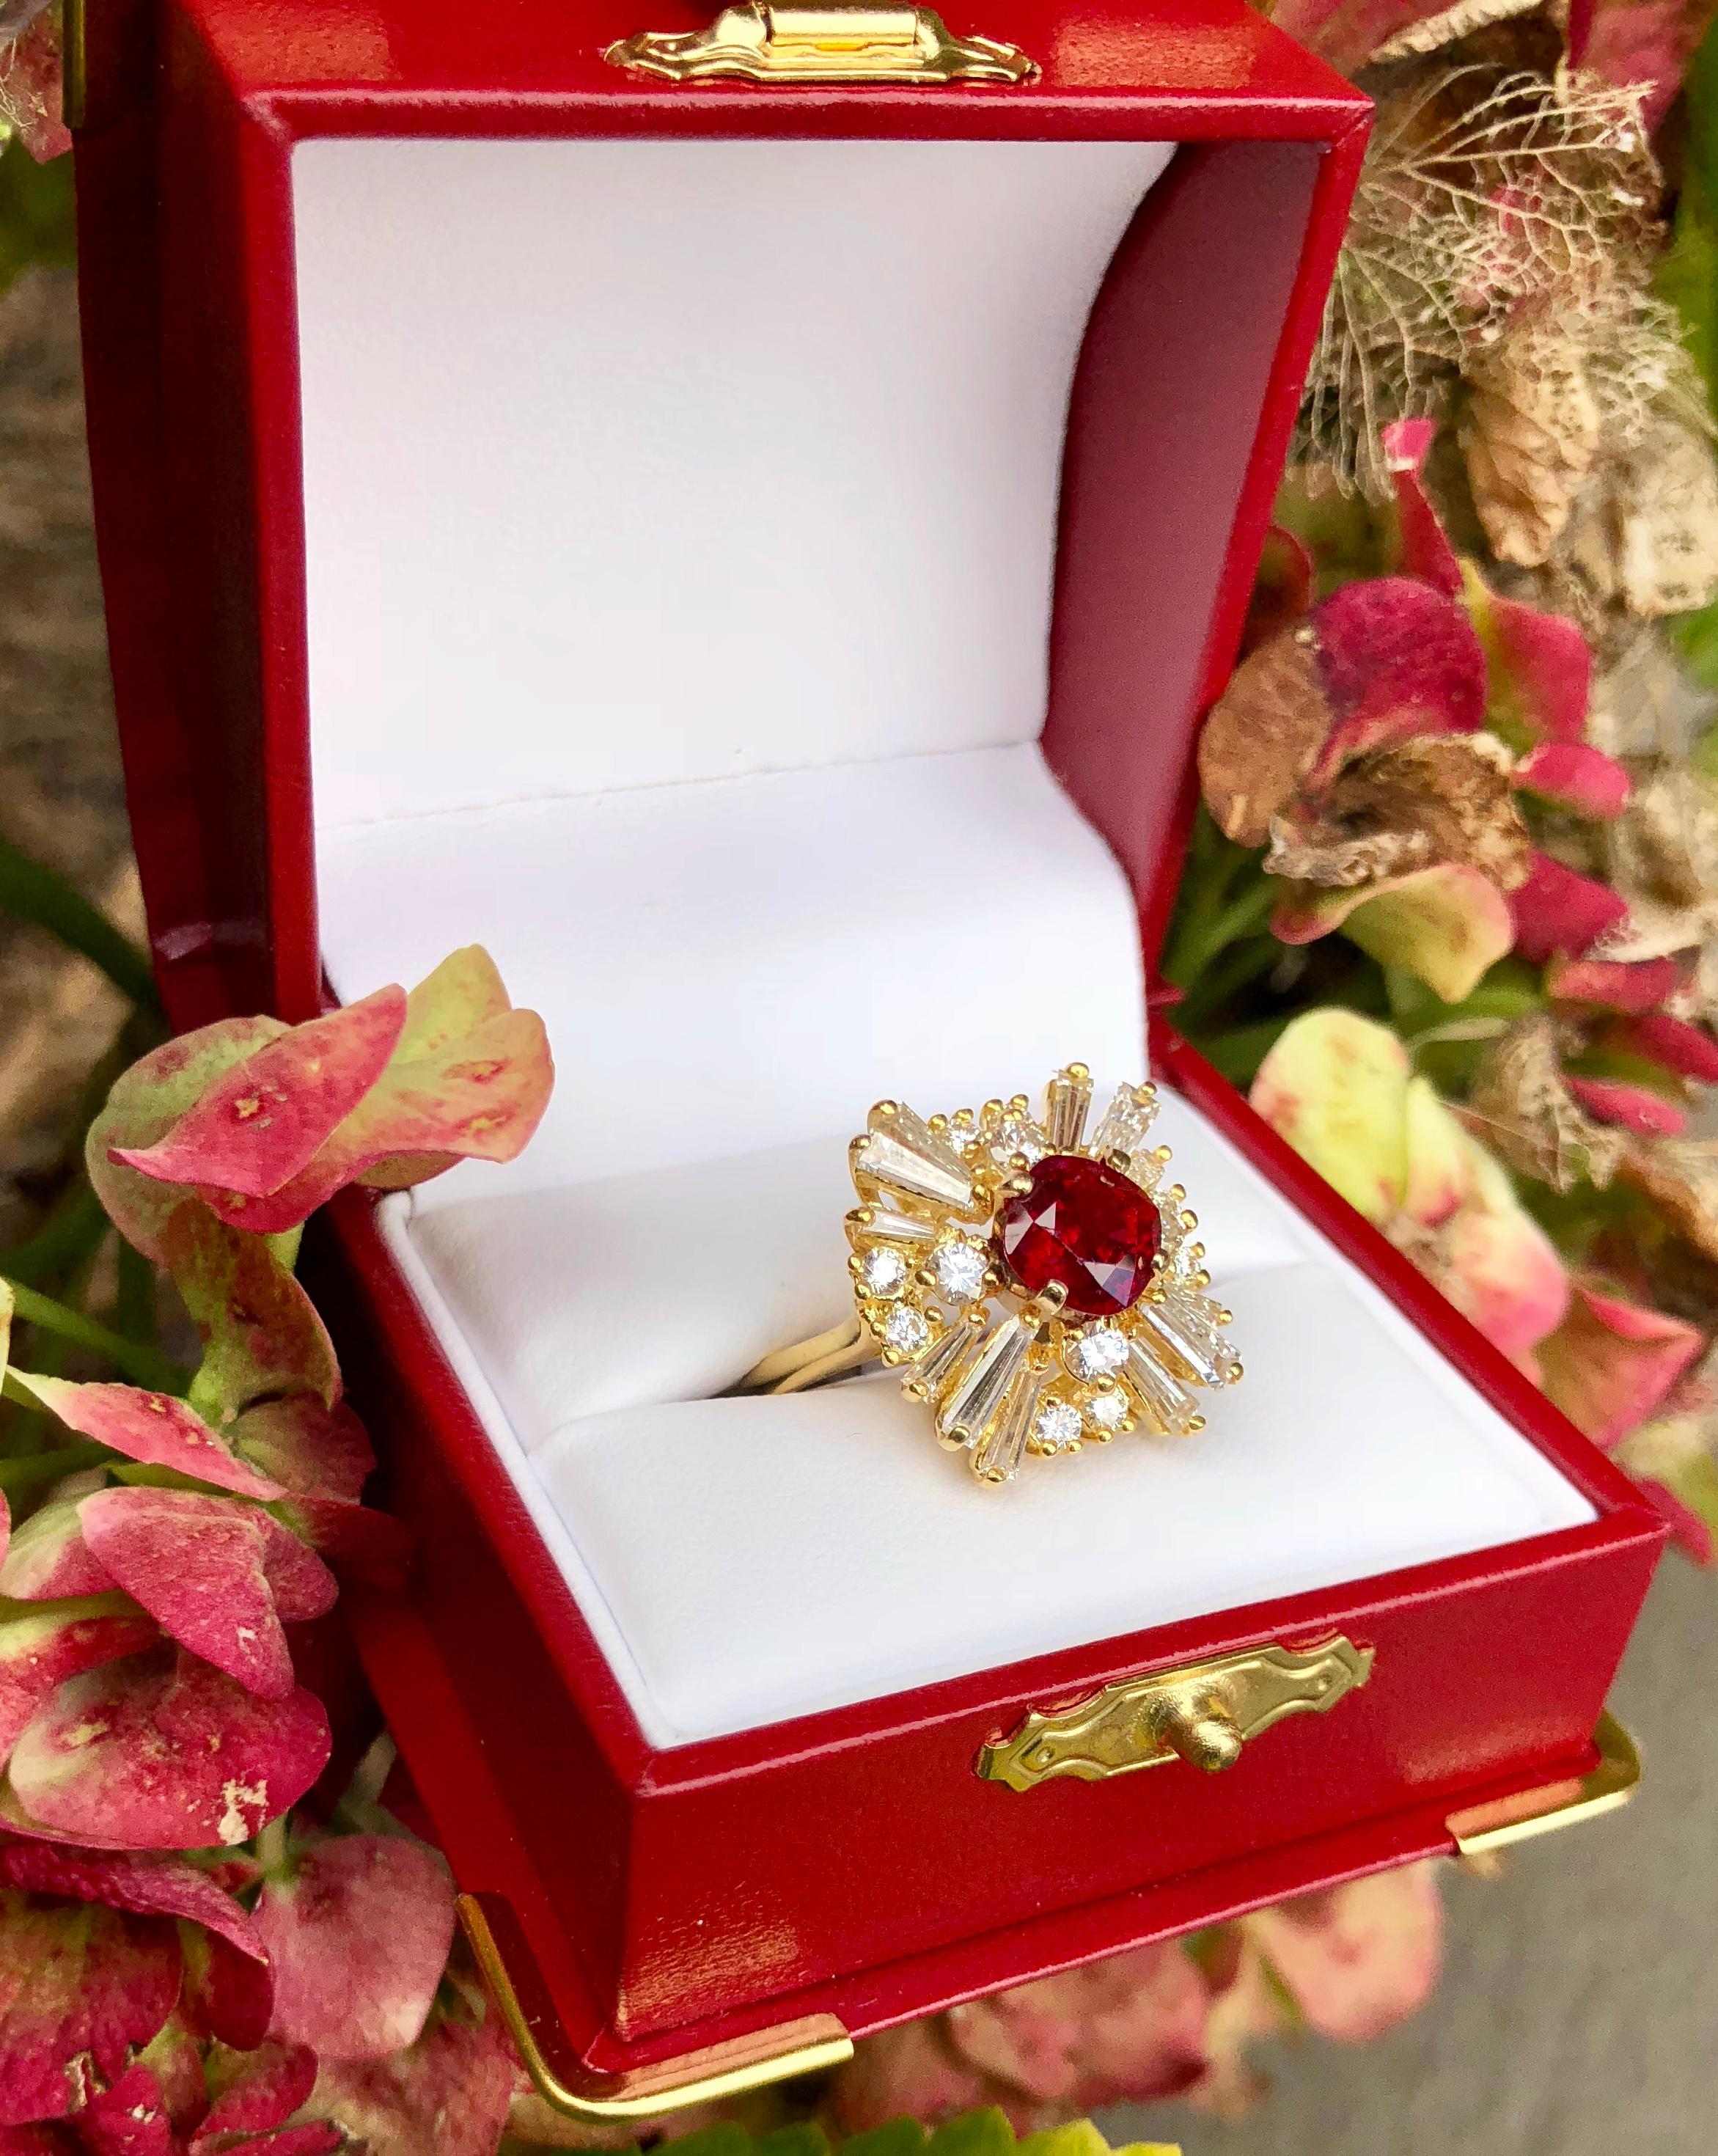 Beautiful brilliant cushion cut natural corundum ruby is GIA certified, prong set in 18 karat yellow gold and surrounded by prong-set tapered baguette and round diamonds in a timeless ballerina-style cocktail ring. The total combined carat weight of